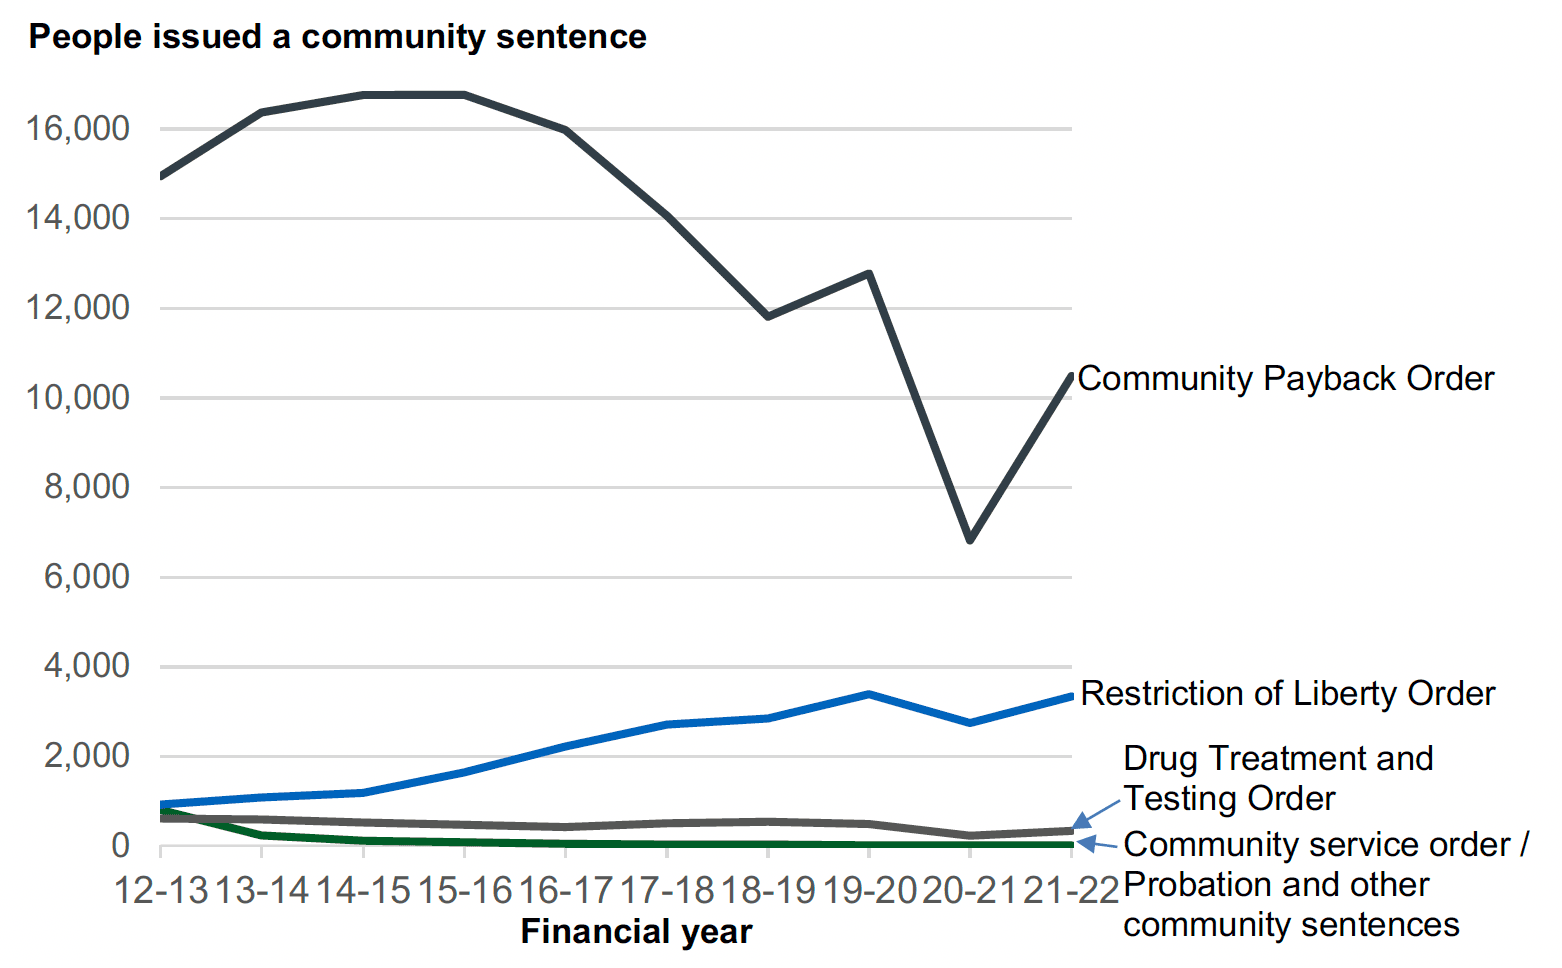 A line chart showing the number of individuals issued a community sentence by type between 2012-13 and 2021-22 by community sentence type. Community Payback Orders make up the majority on sentences at over 10,000 in 2021-22, more than double Restriction of Liberty Orders.